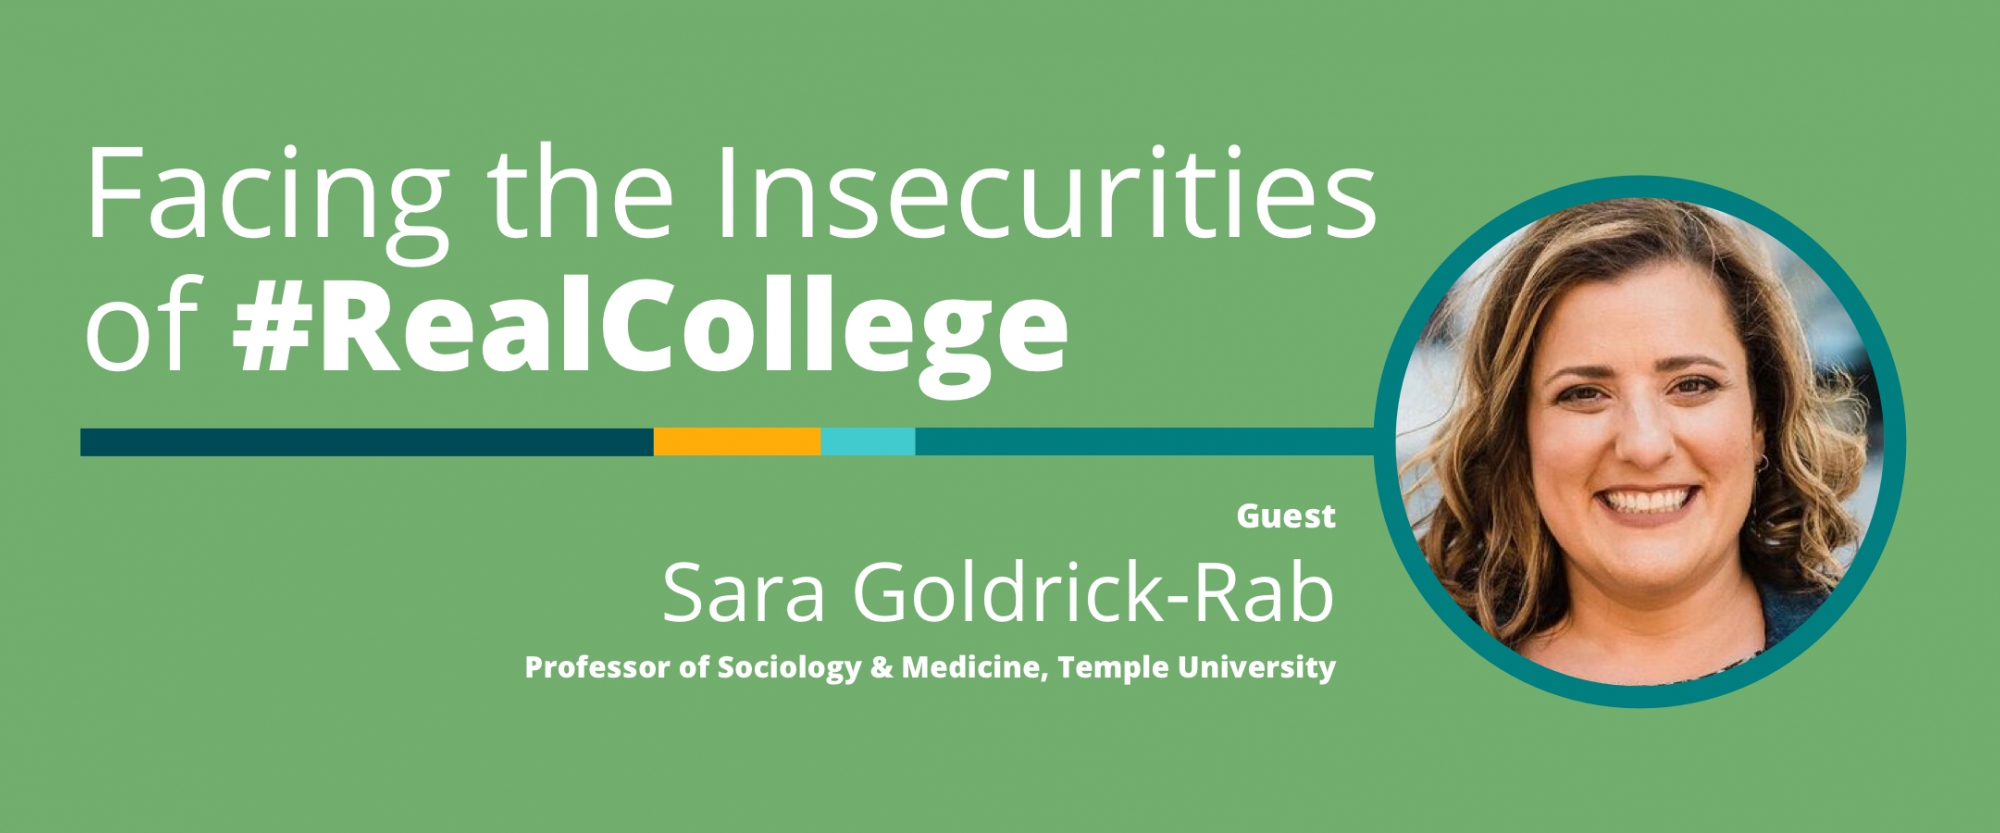 Facing the Insecurities of #RealCollege